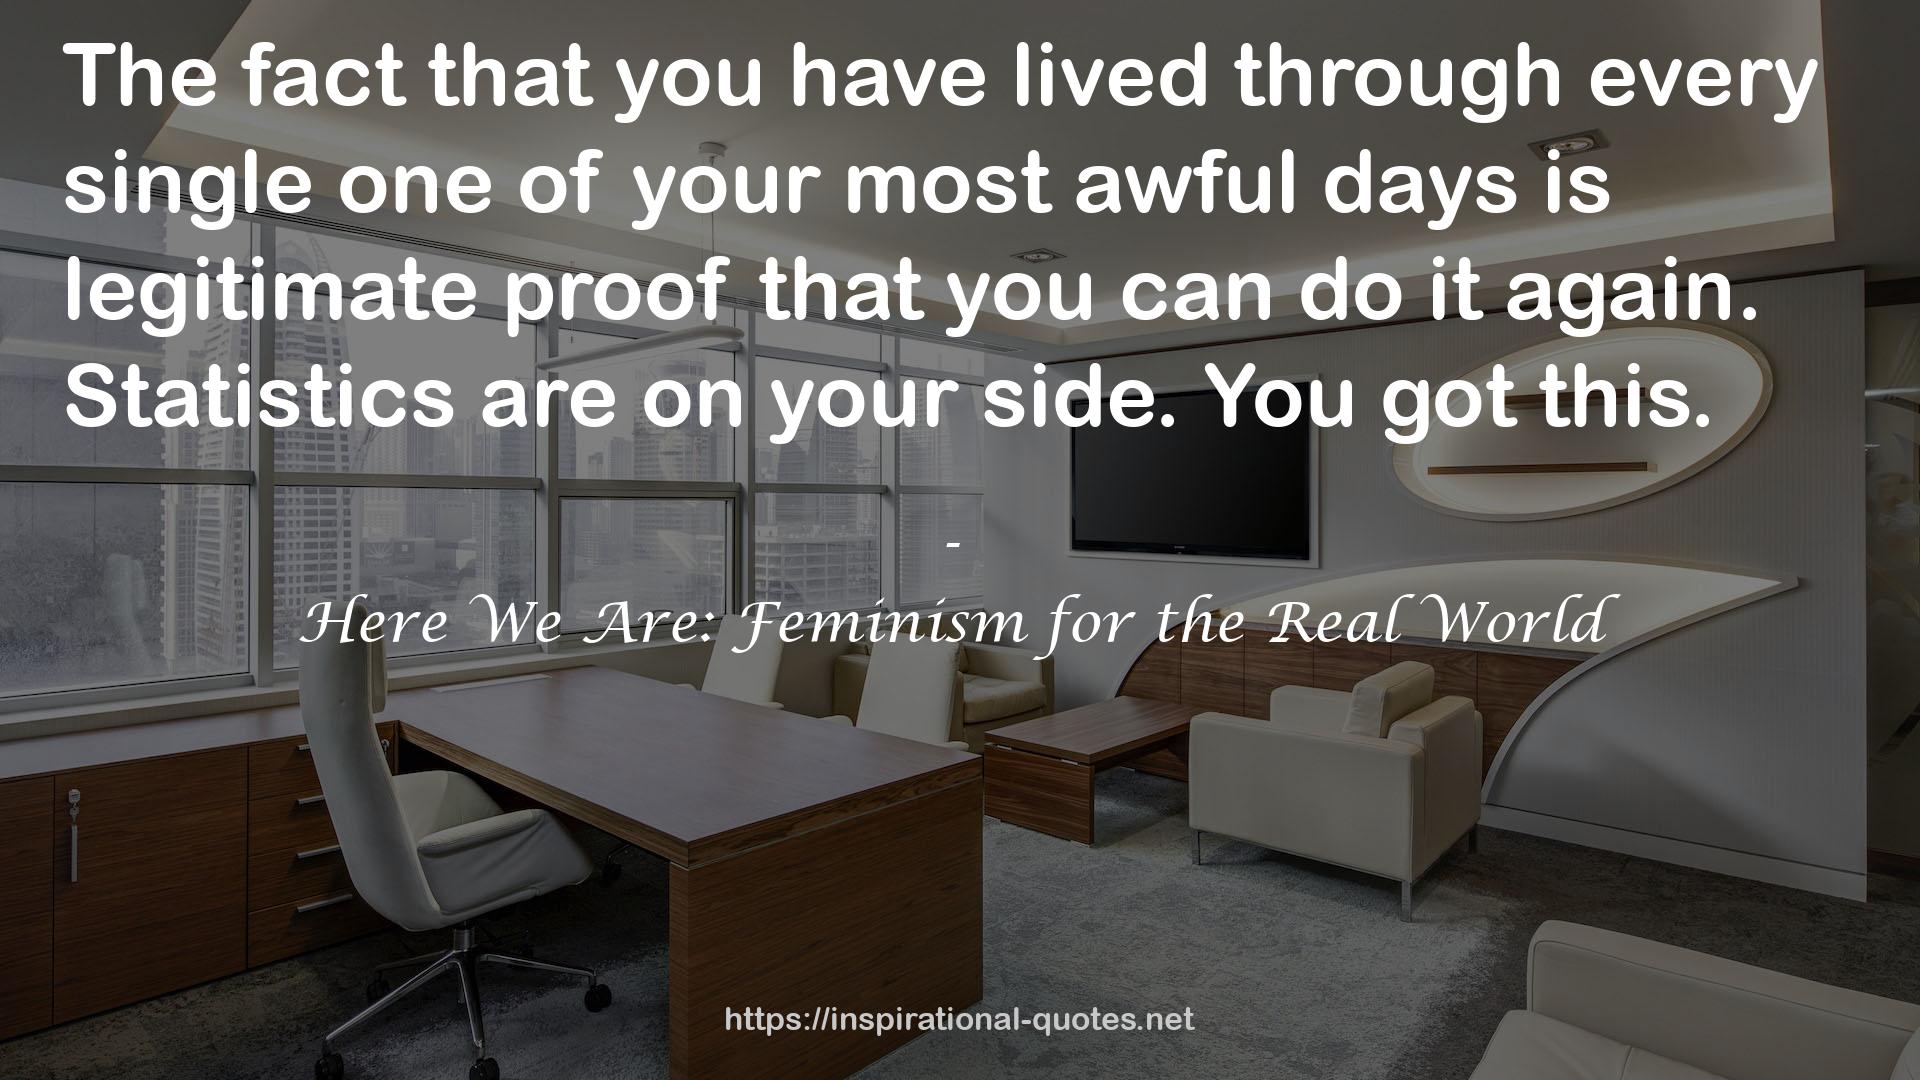 Here We Are: Feminism for the Real World QUOTES